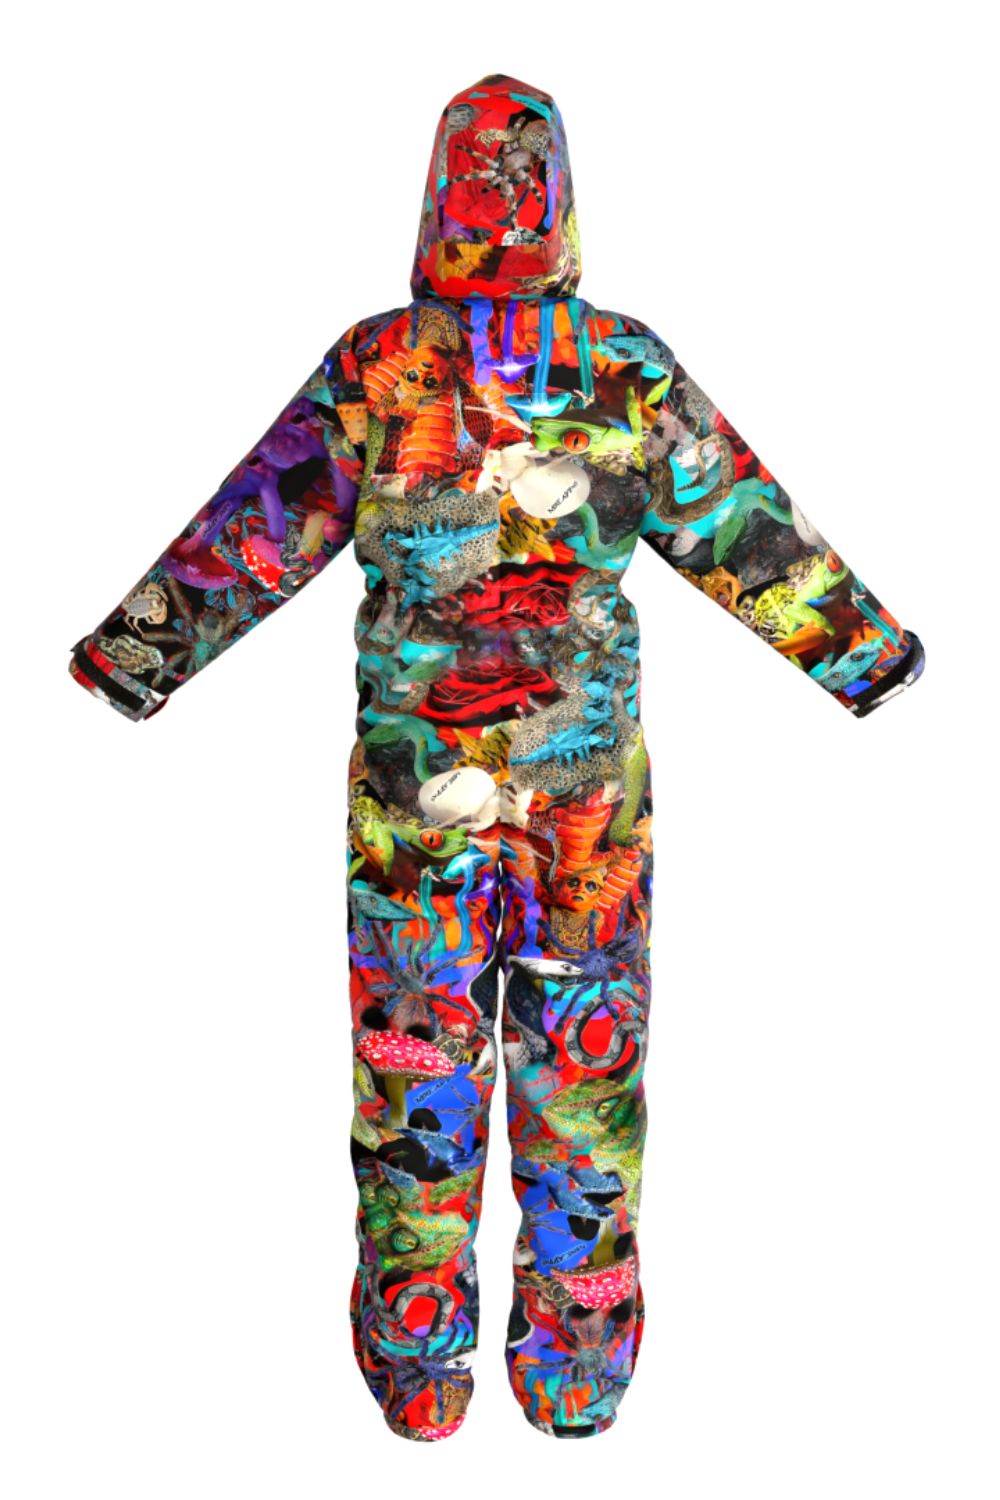 Men's winter ski / snowboard onesie with colorful abstract print / Snowsuit